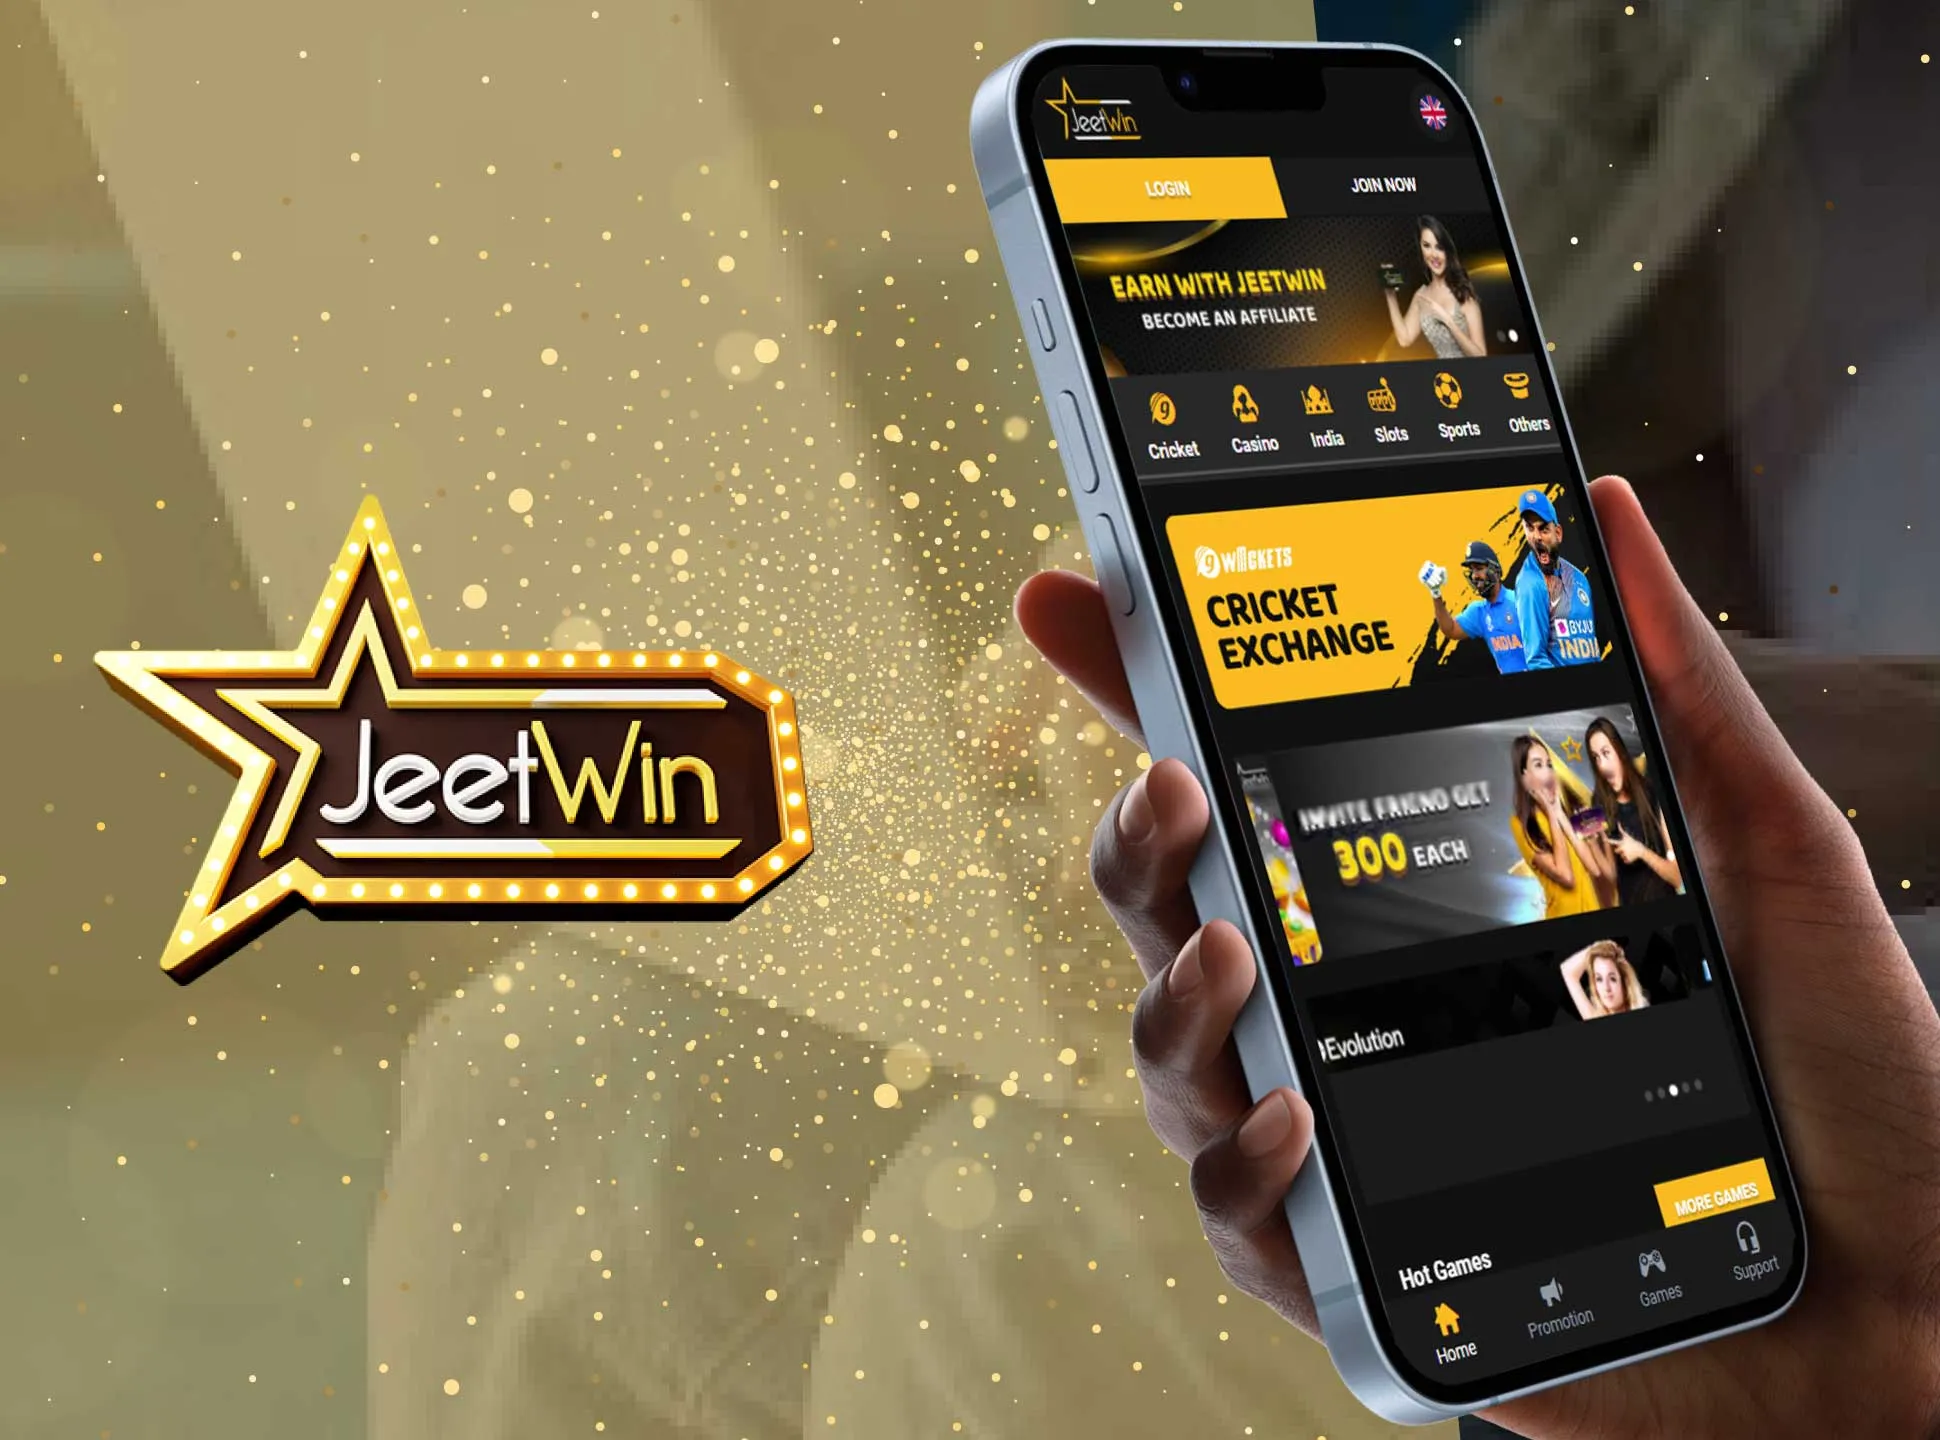 Jeetwin has a user-friendly and convenient website for betting and casino games.